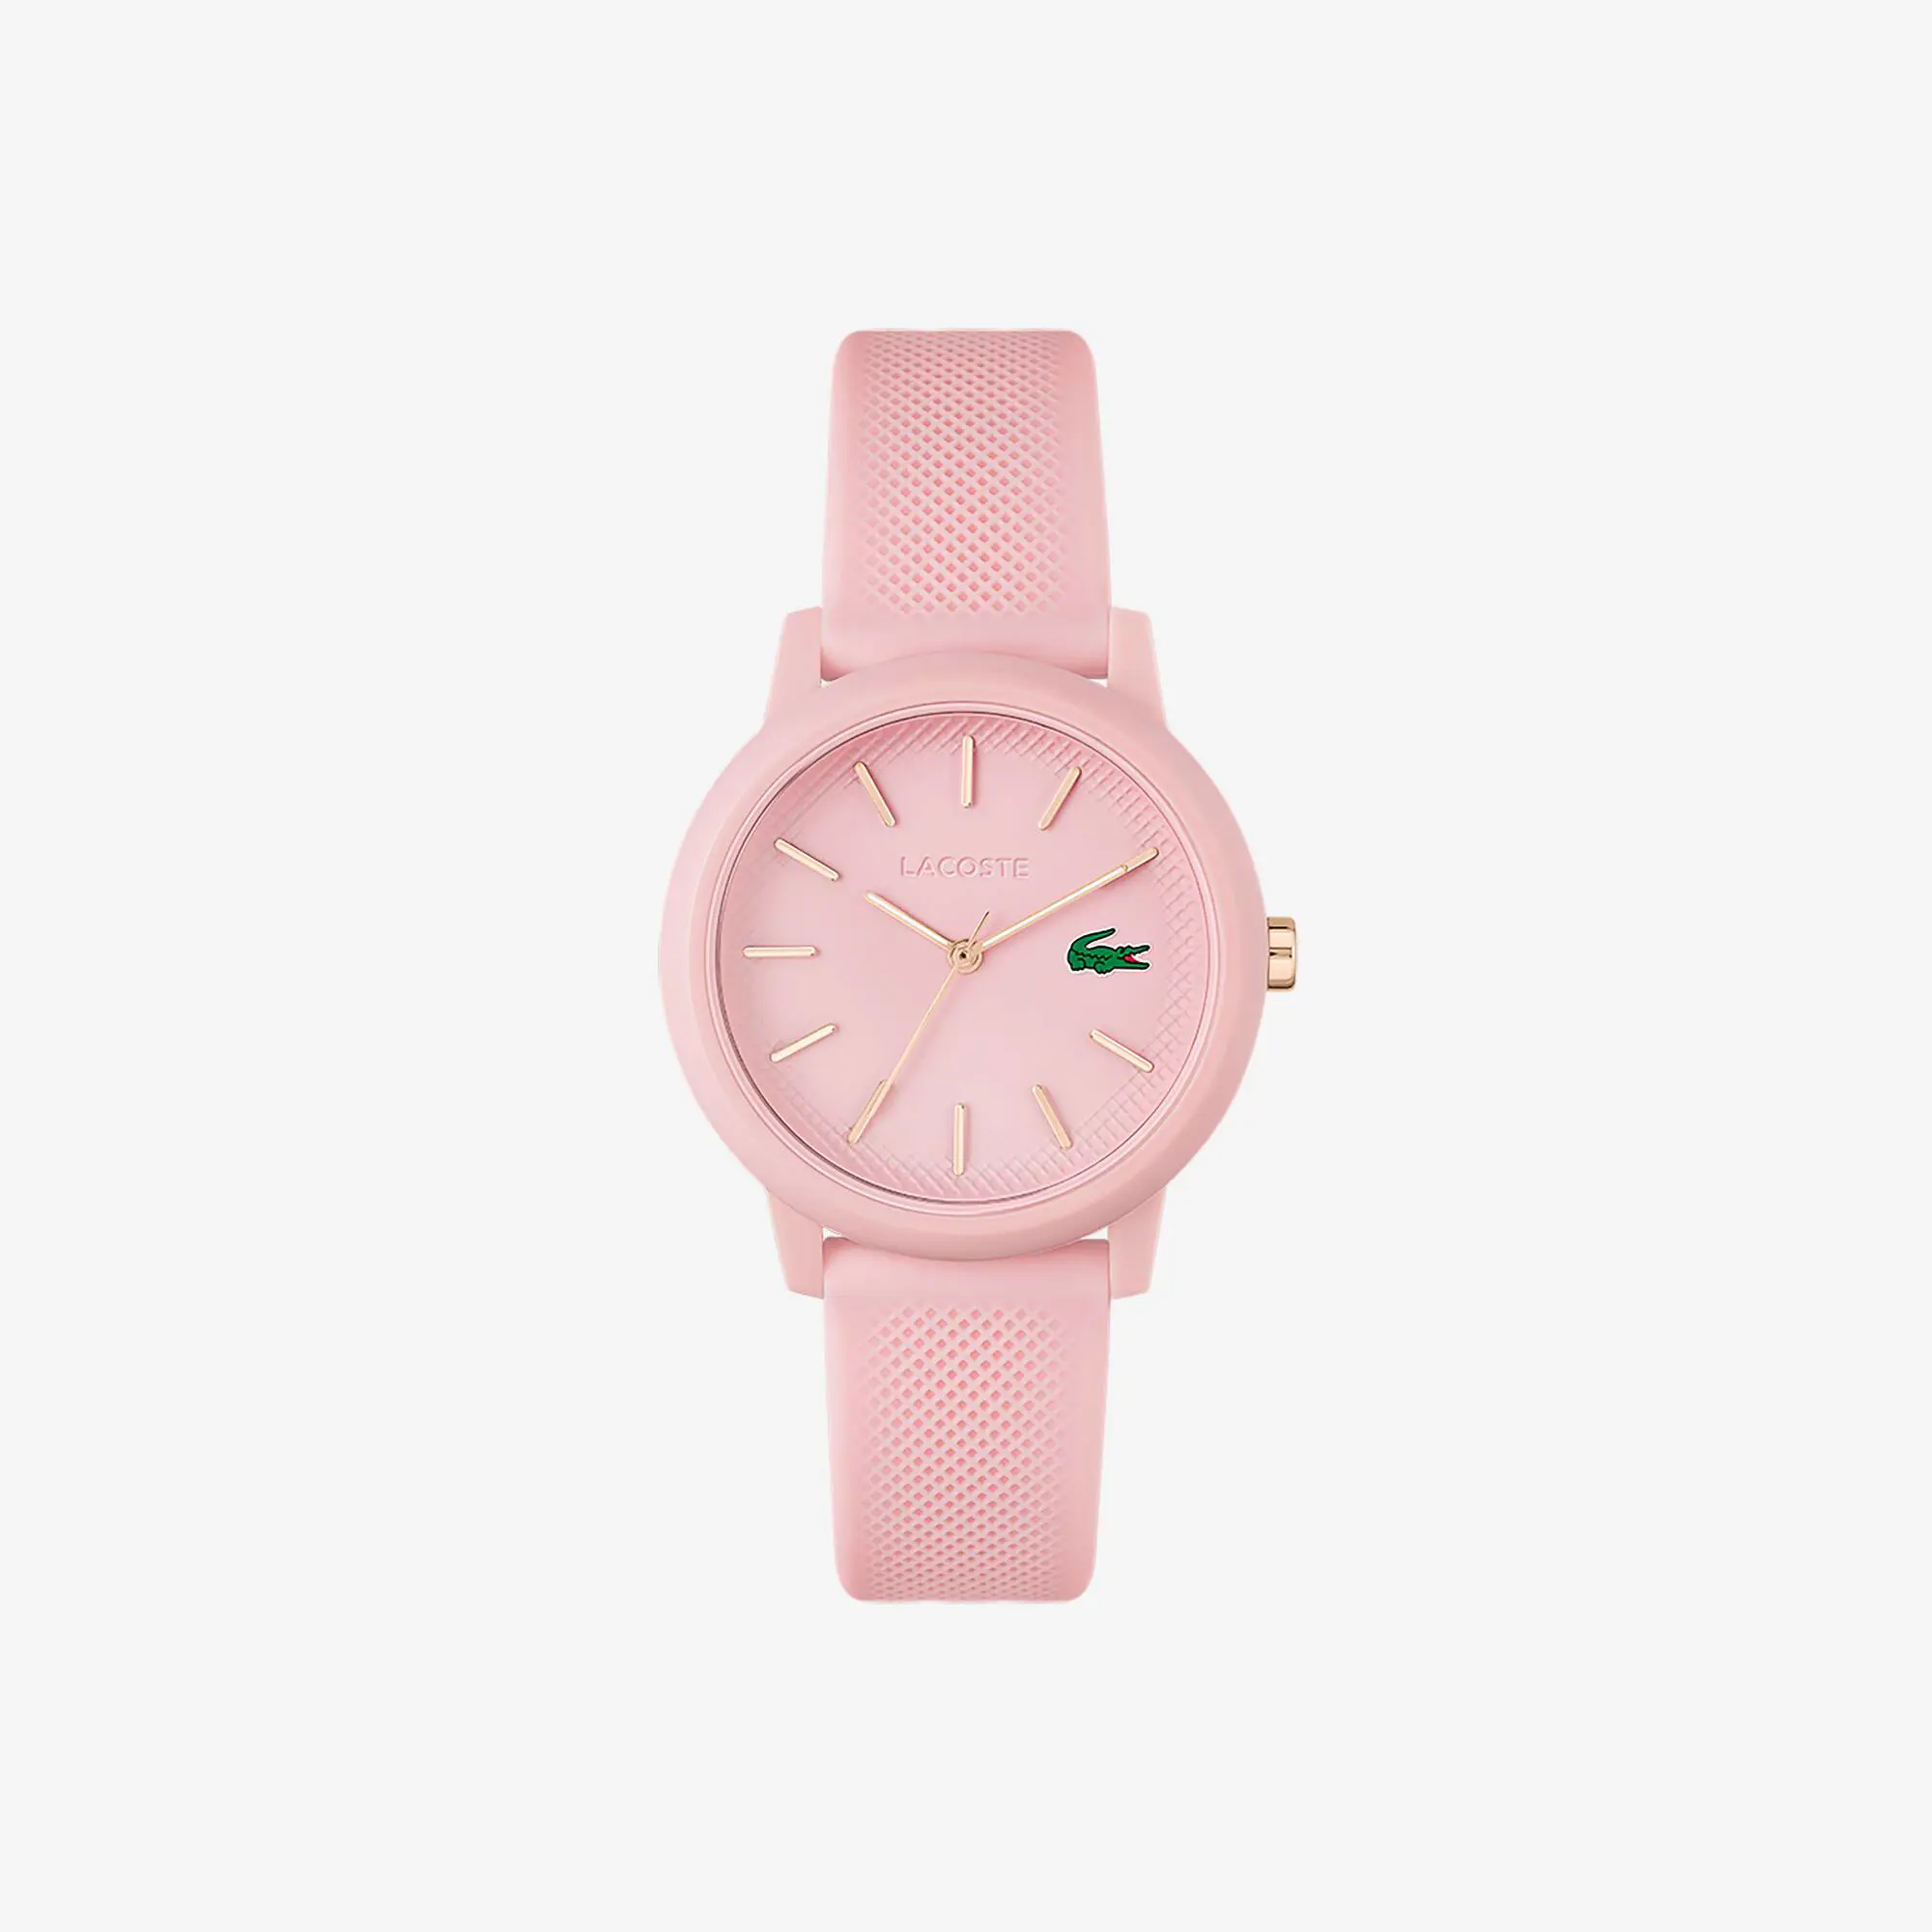 Lacoste Women's Lacoste.12.12 Pink Silicone Strap Watch. 1